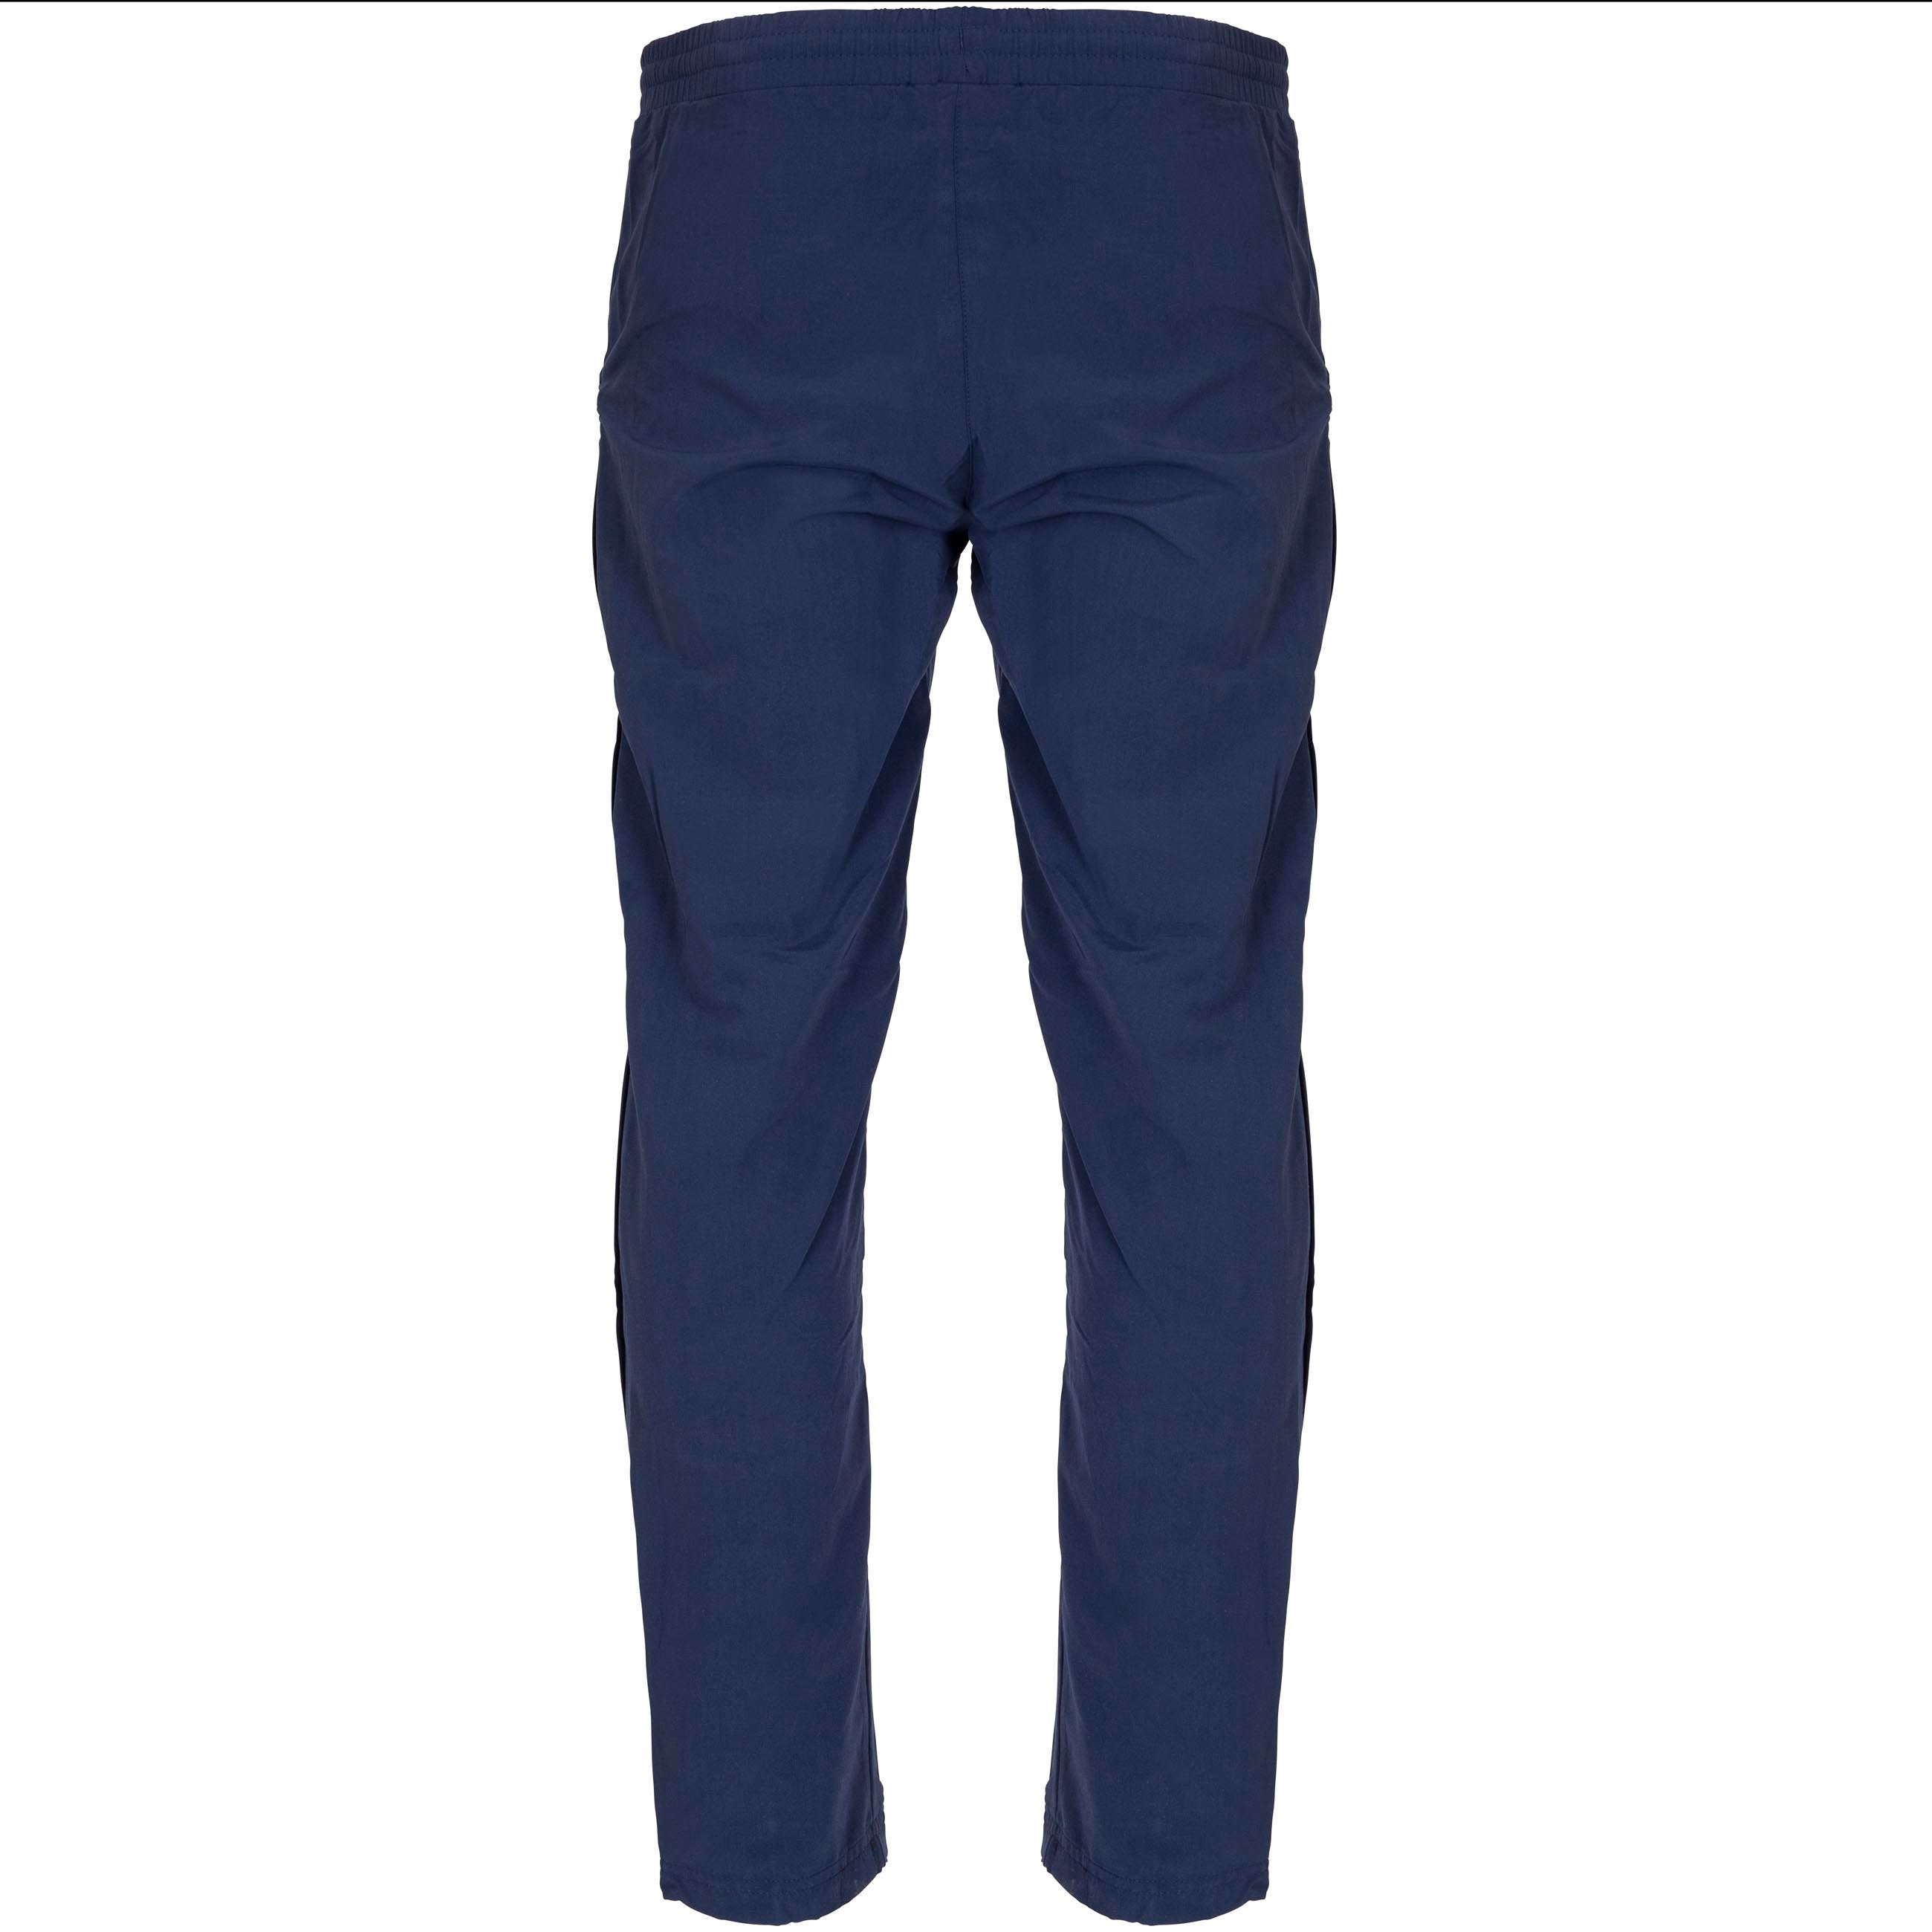 Synergie II Trousers - Mens